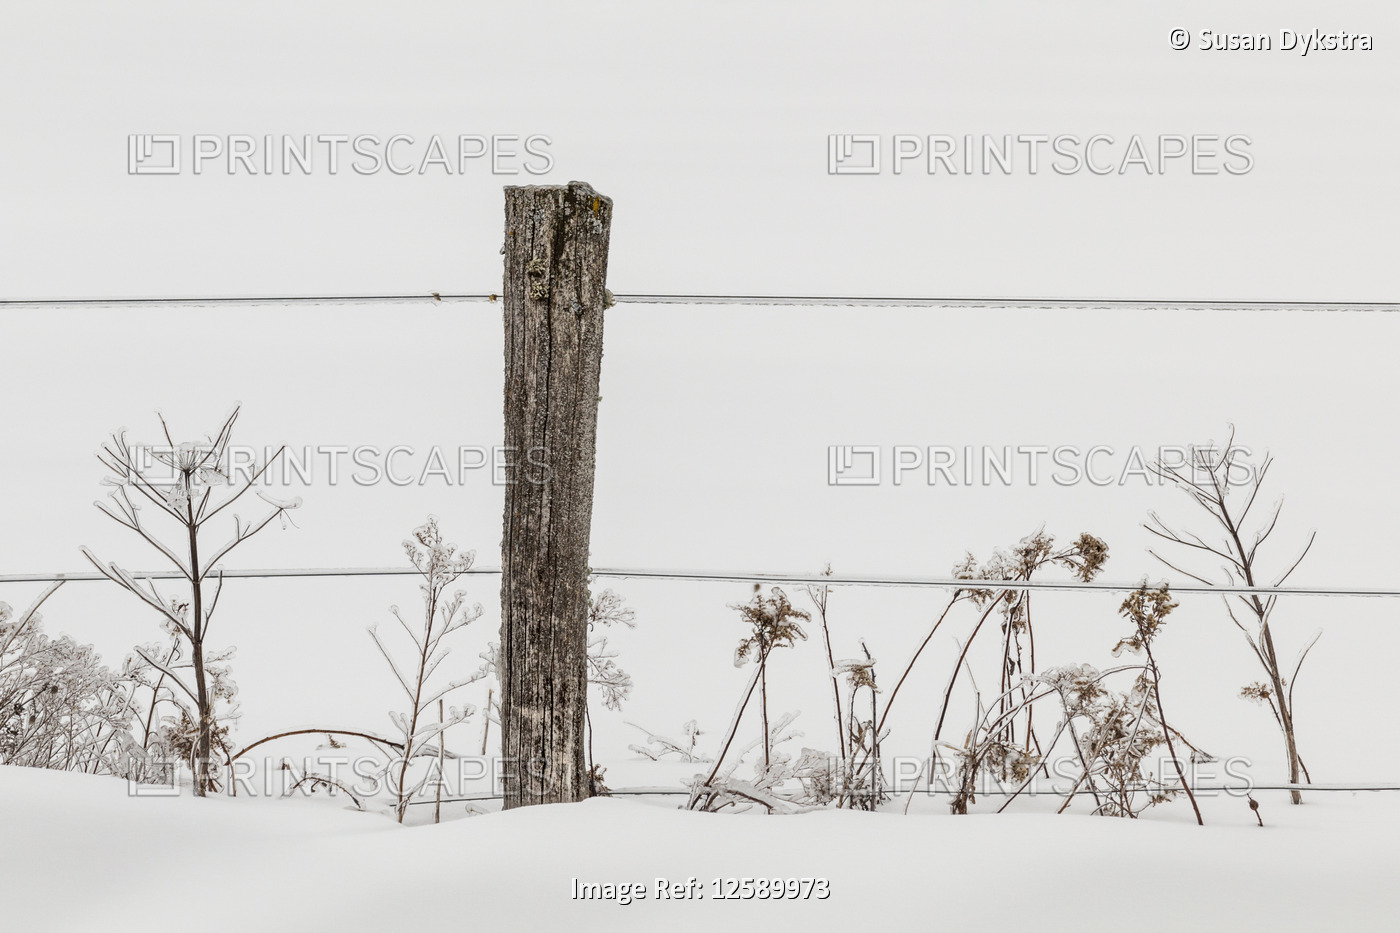 Ice-covered plants and fence